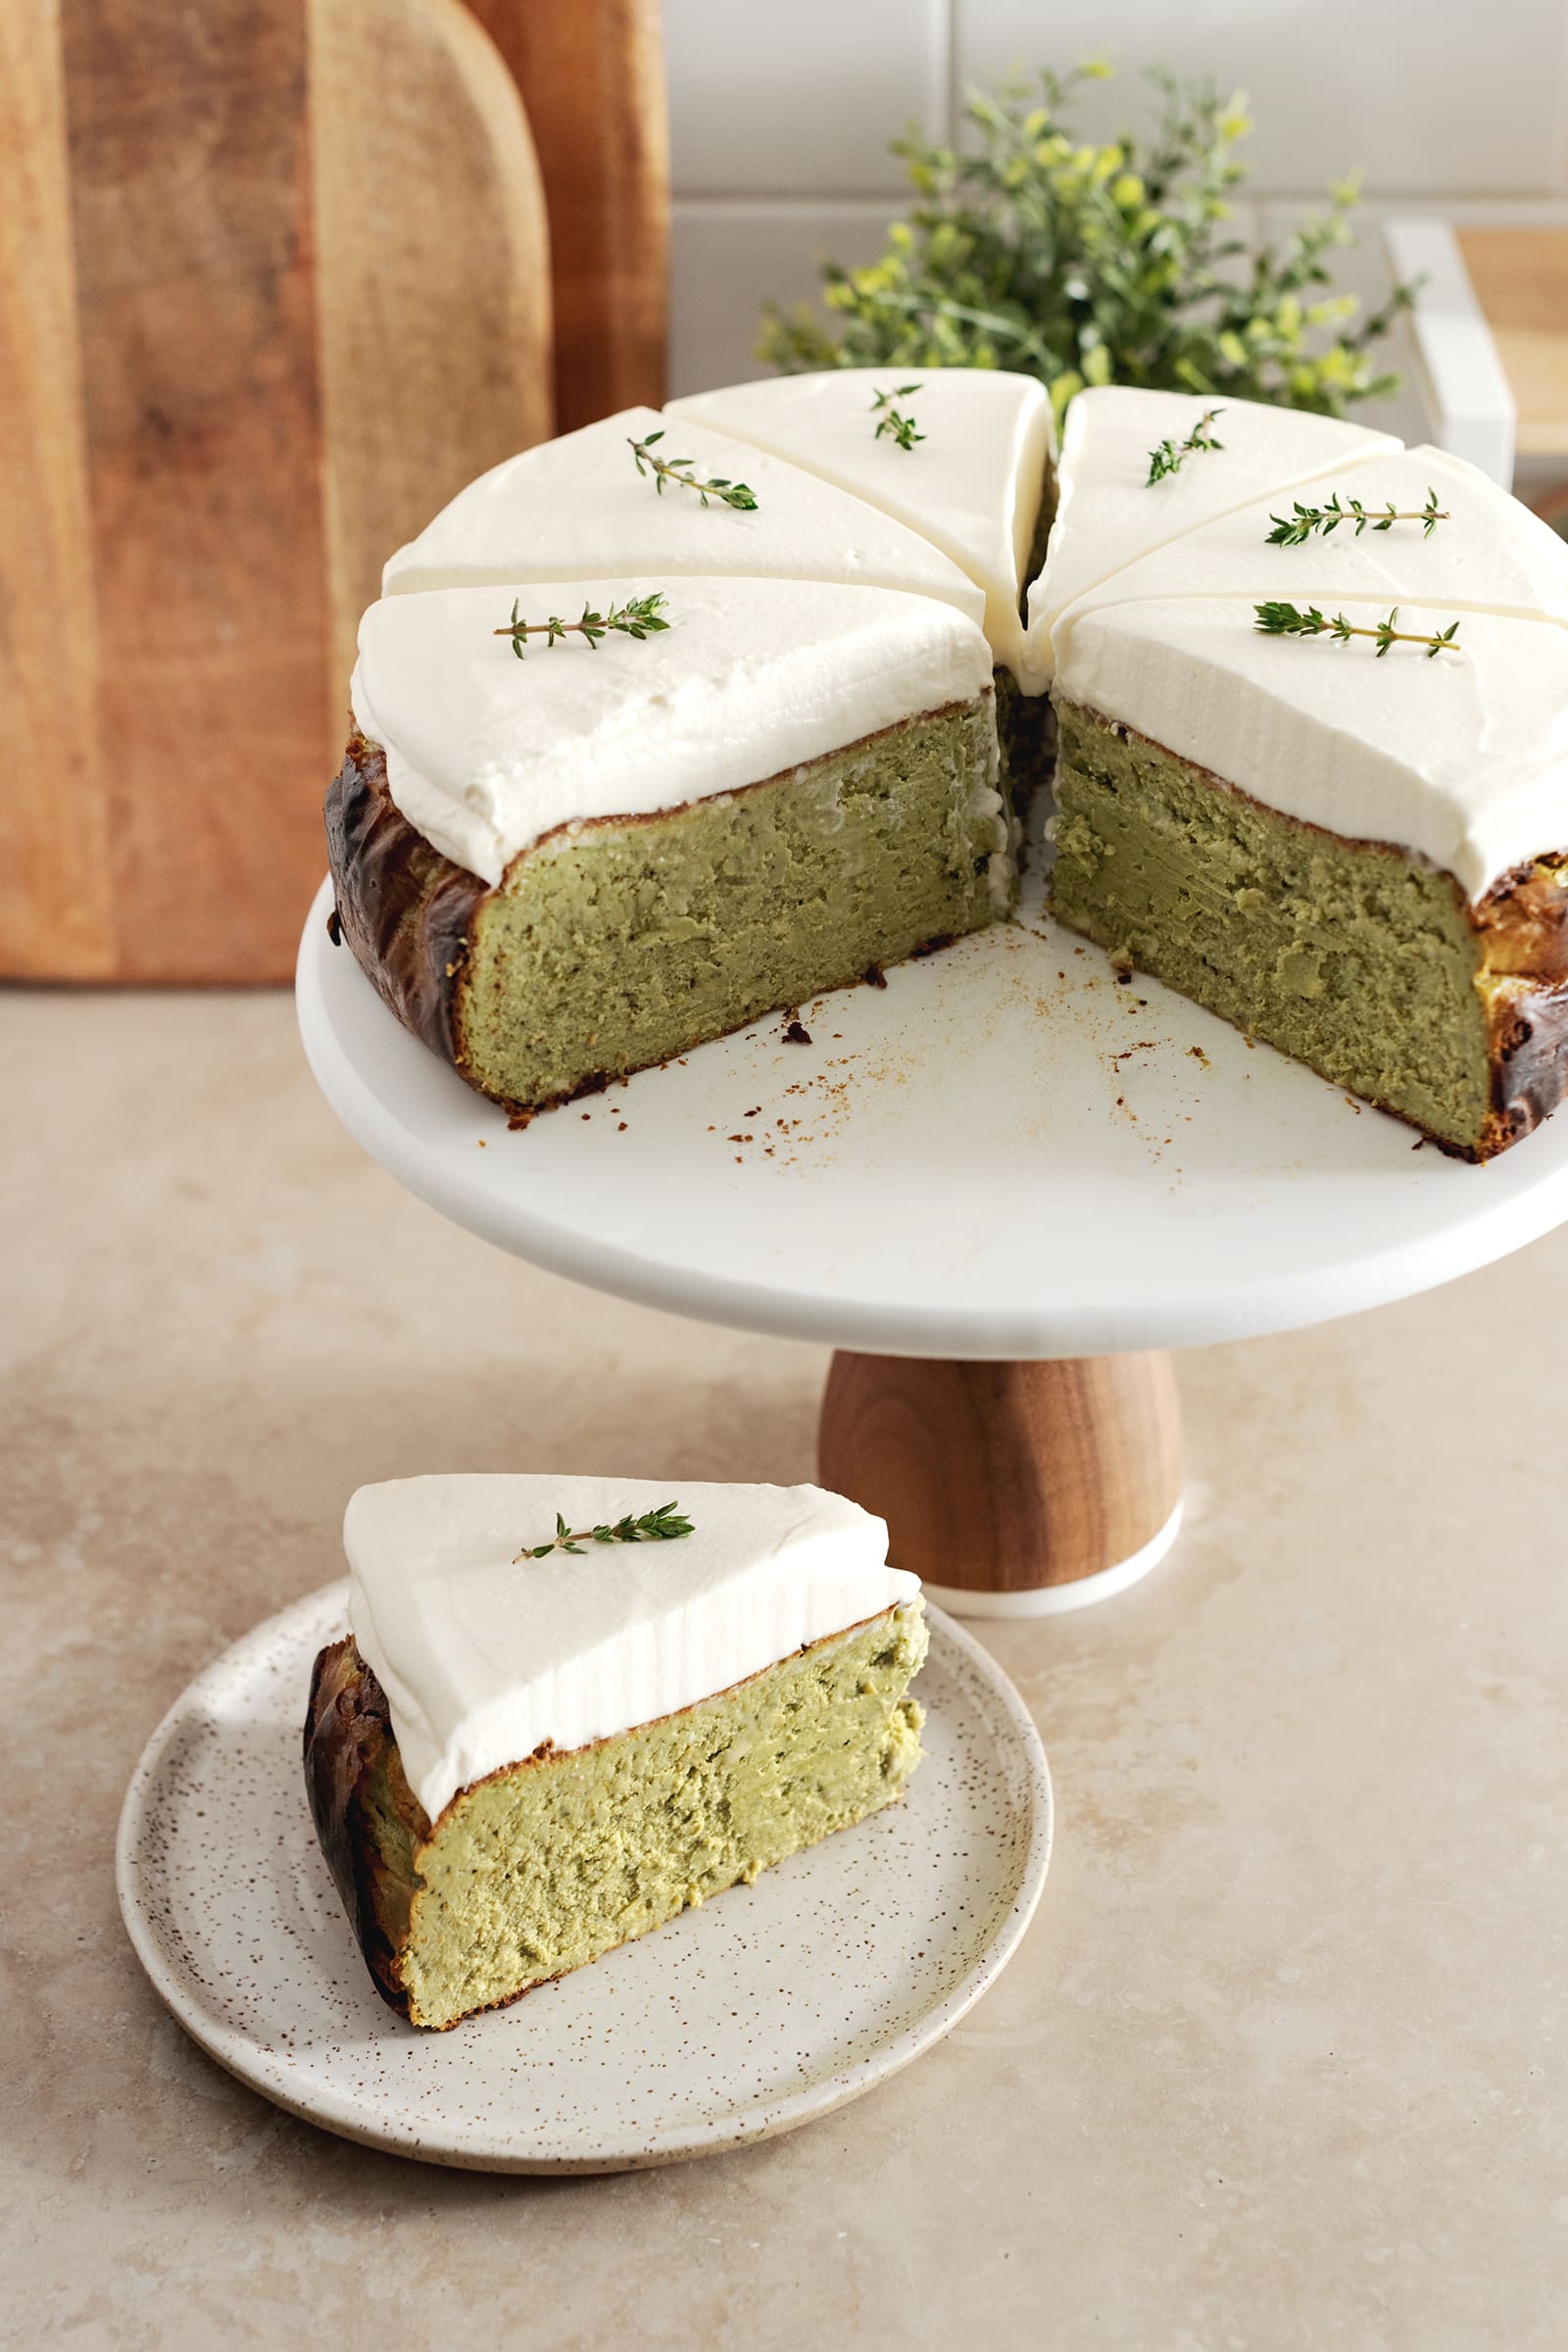 A slice of matcha basque cheesecake on a plate and the rest of the cake on a cake stand.